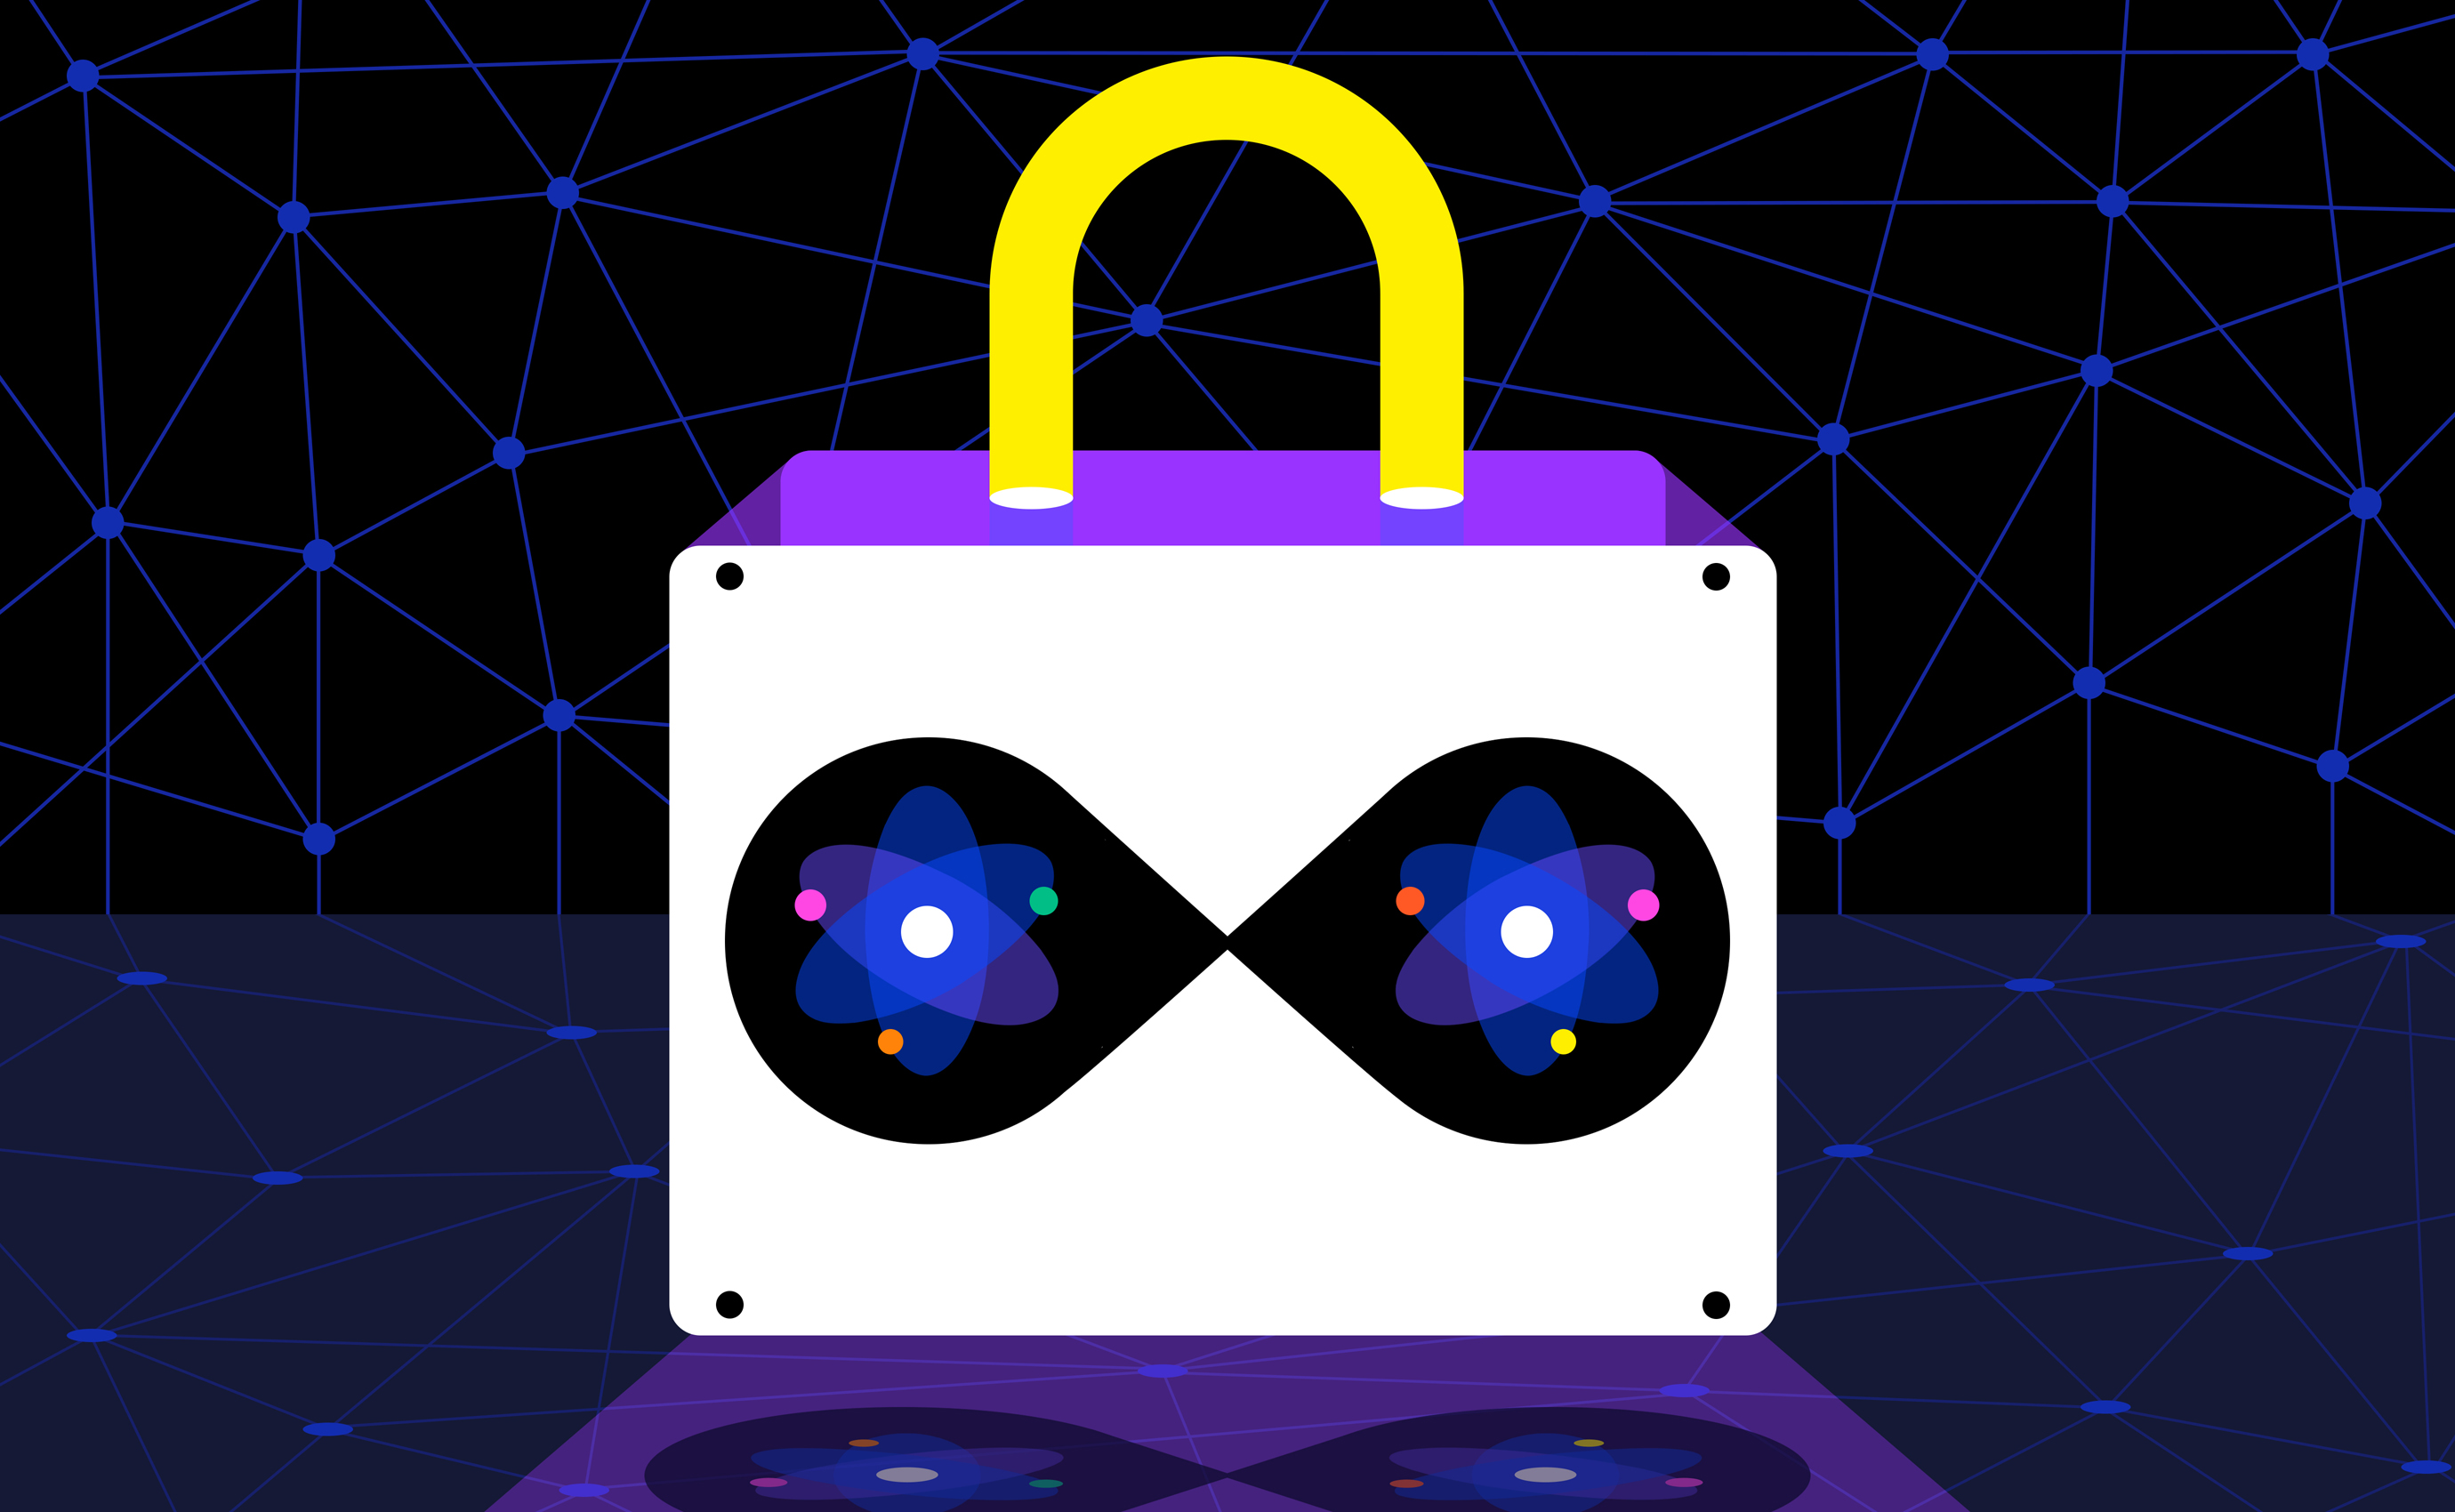 Conceptual illustration of a lock with entangled photons inside it, on an illustrated network background